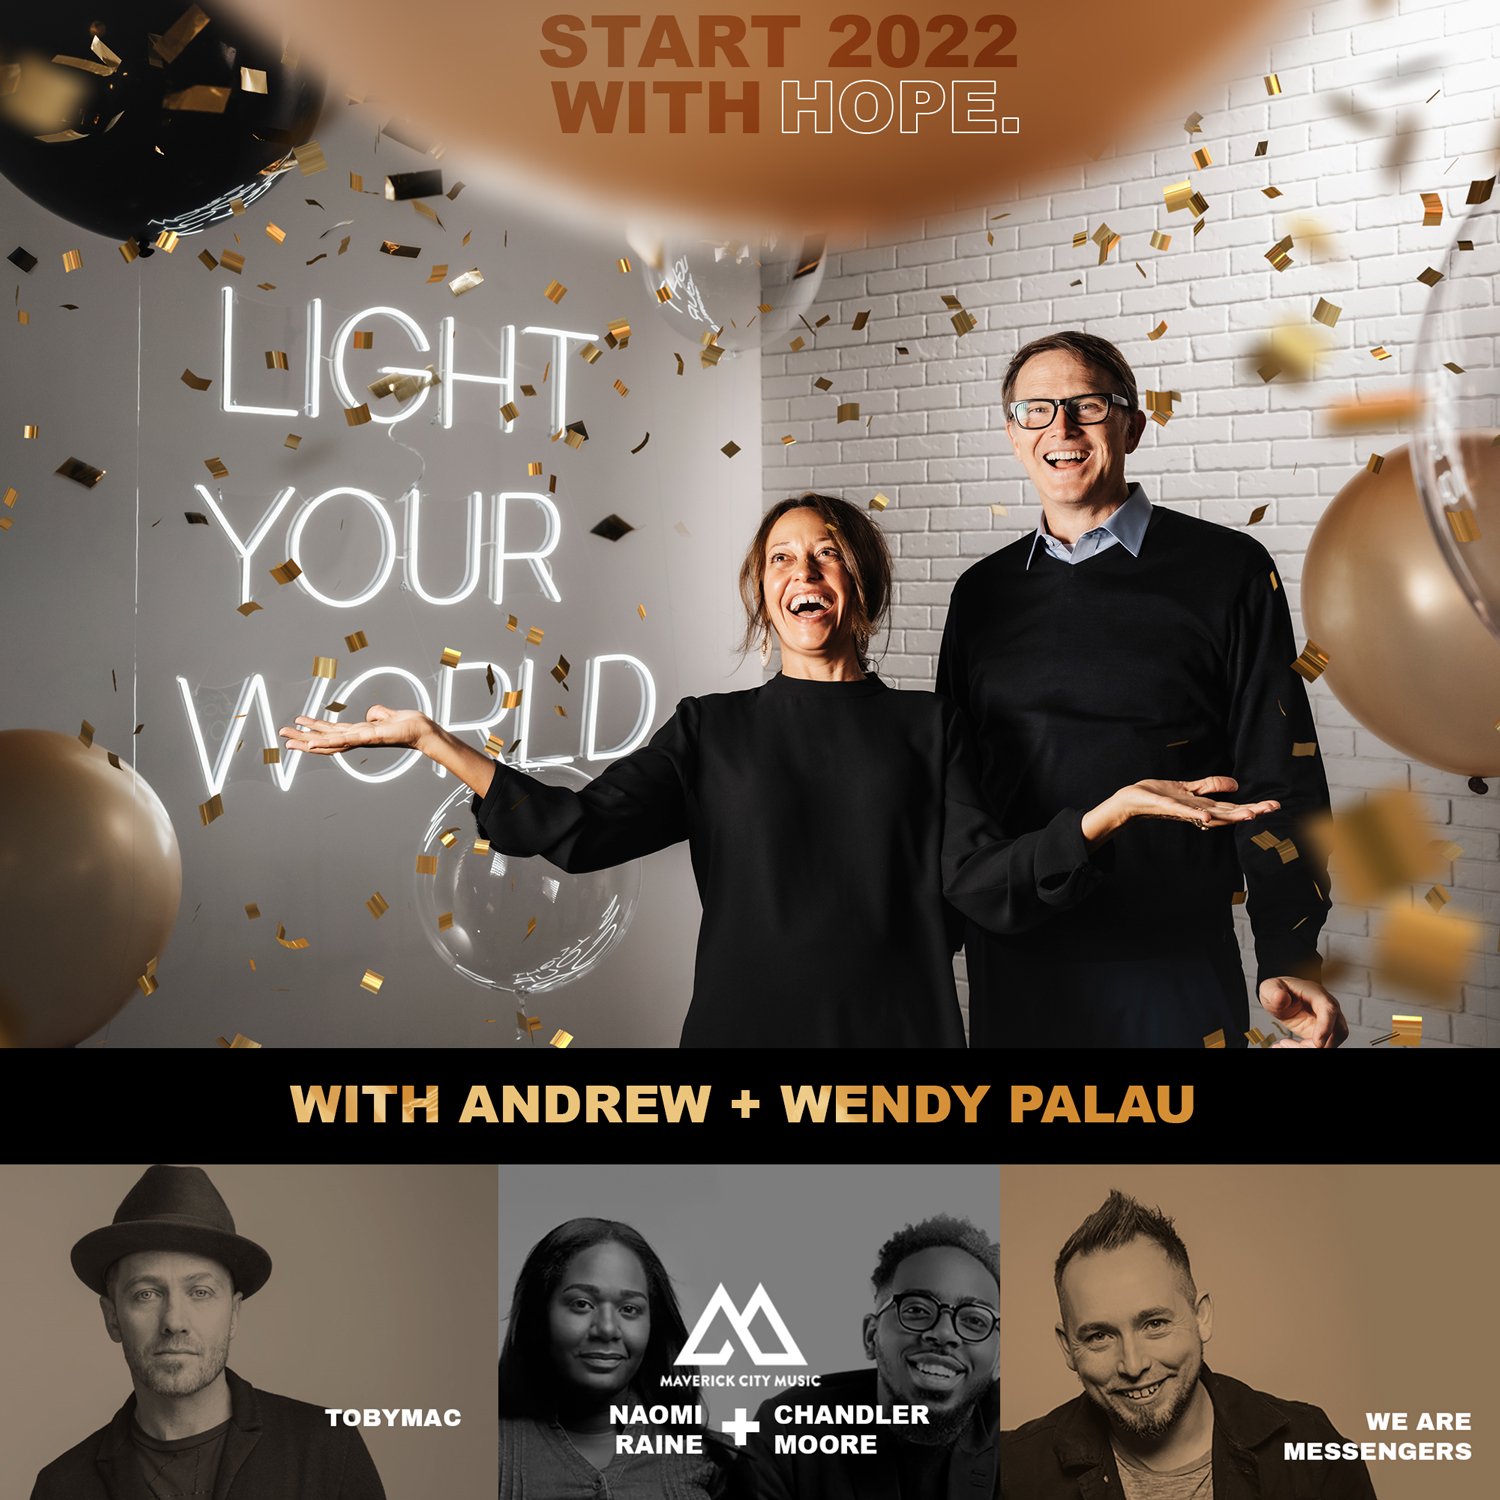 Luis Palau Association will host a global, cinematic Gospel experience on December 31, 2021 - The online event, called Light Your World.